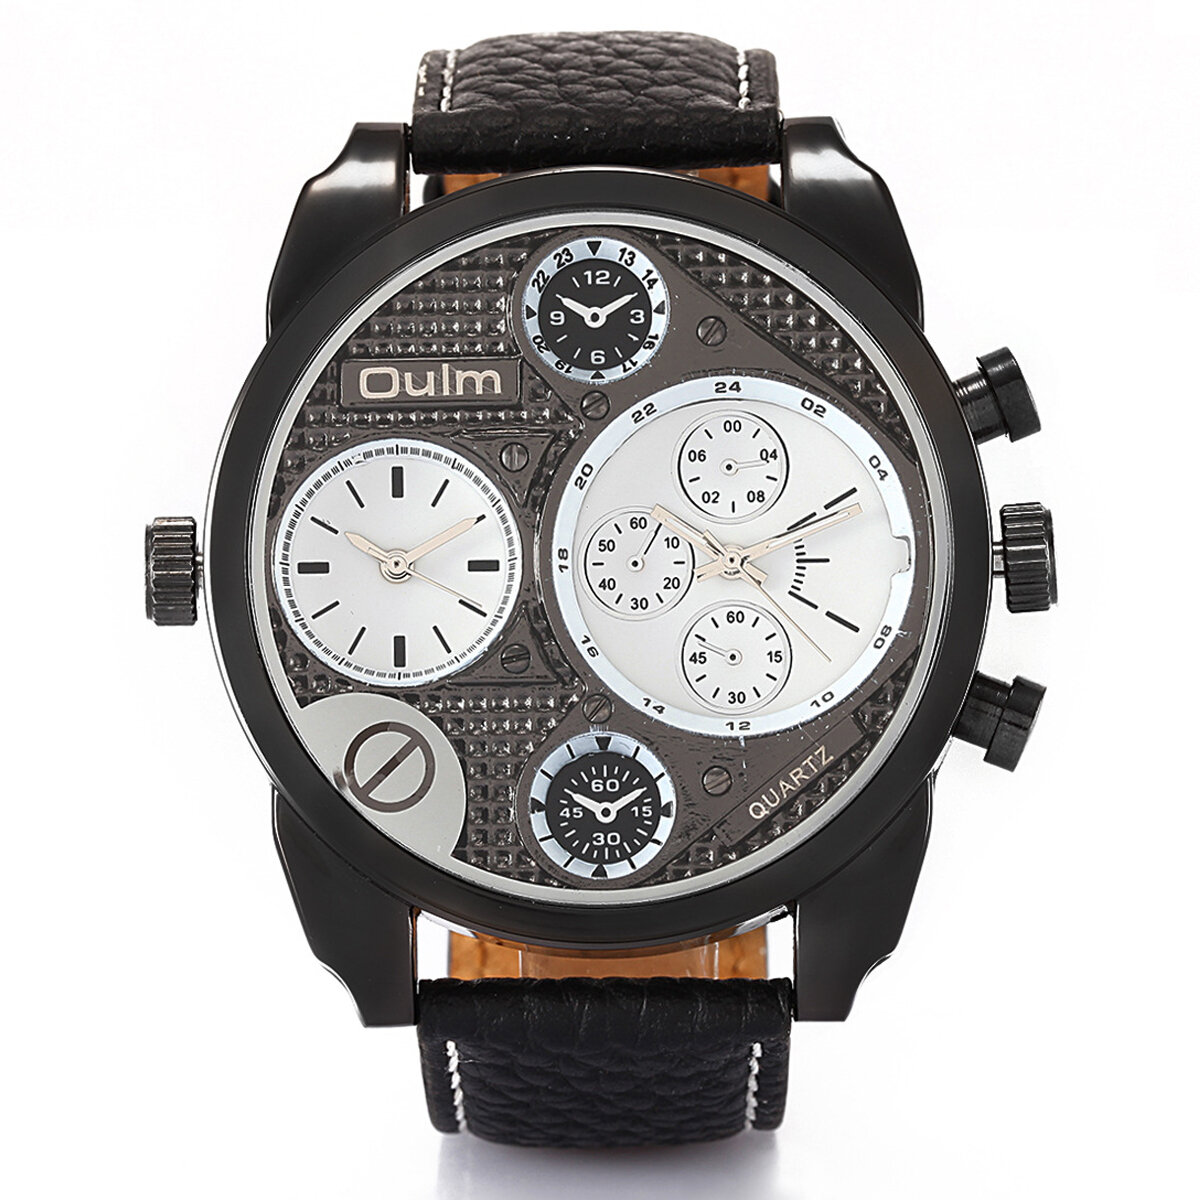 

Oulm 9316 Vintage Fashion Men Watch Large Dial Dual Time Zone Waterproof Leather Band Quartz Watch